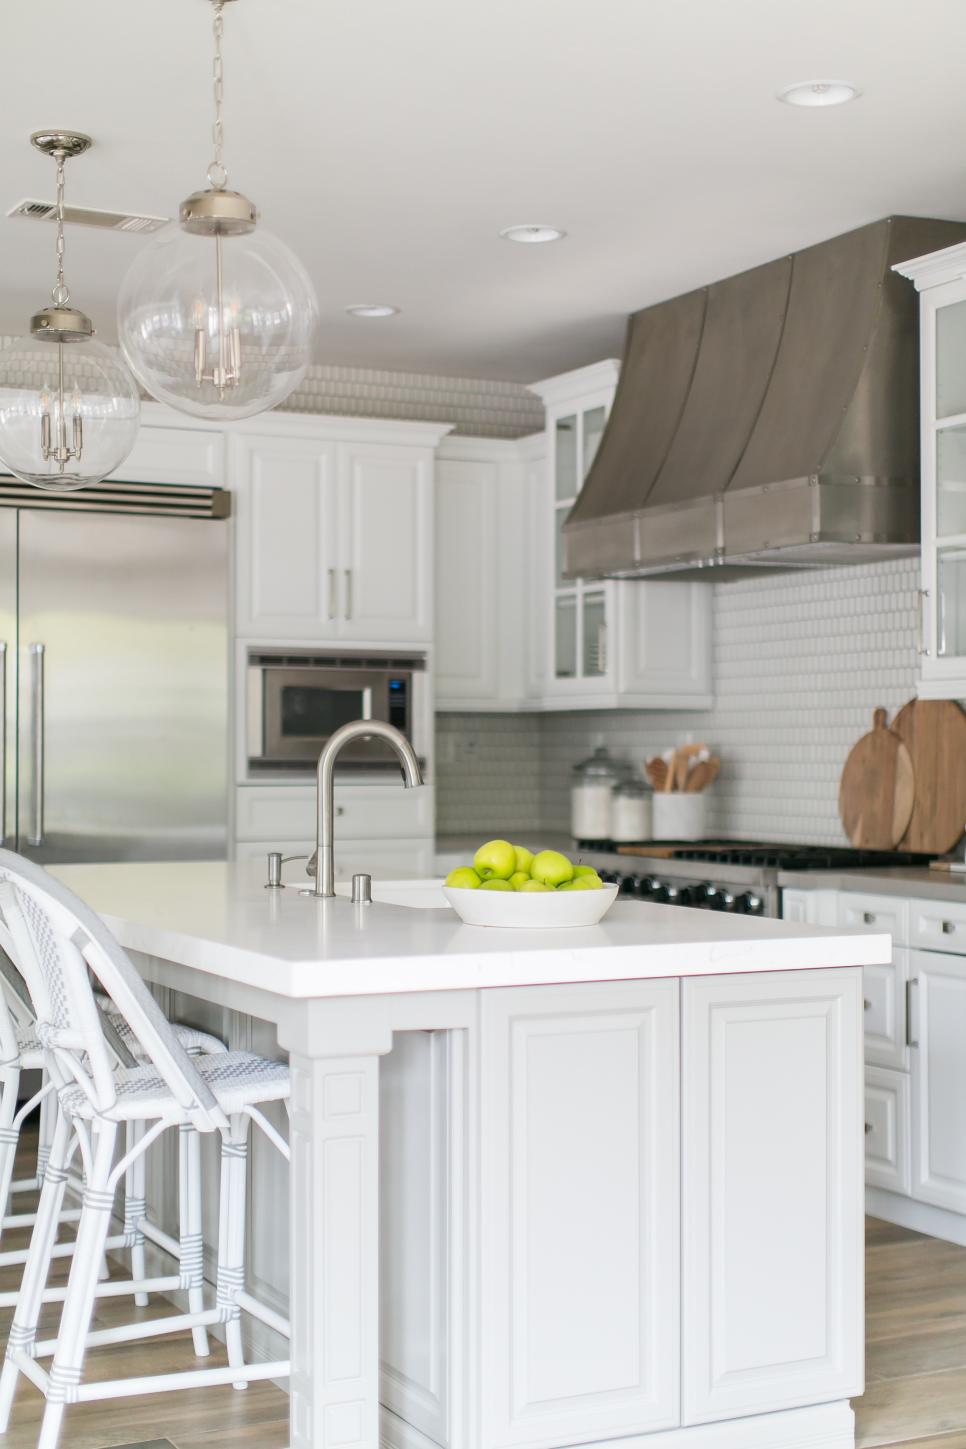 Contemporary White Kitchen With Work Island And Modern Appliances And ...